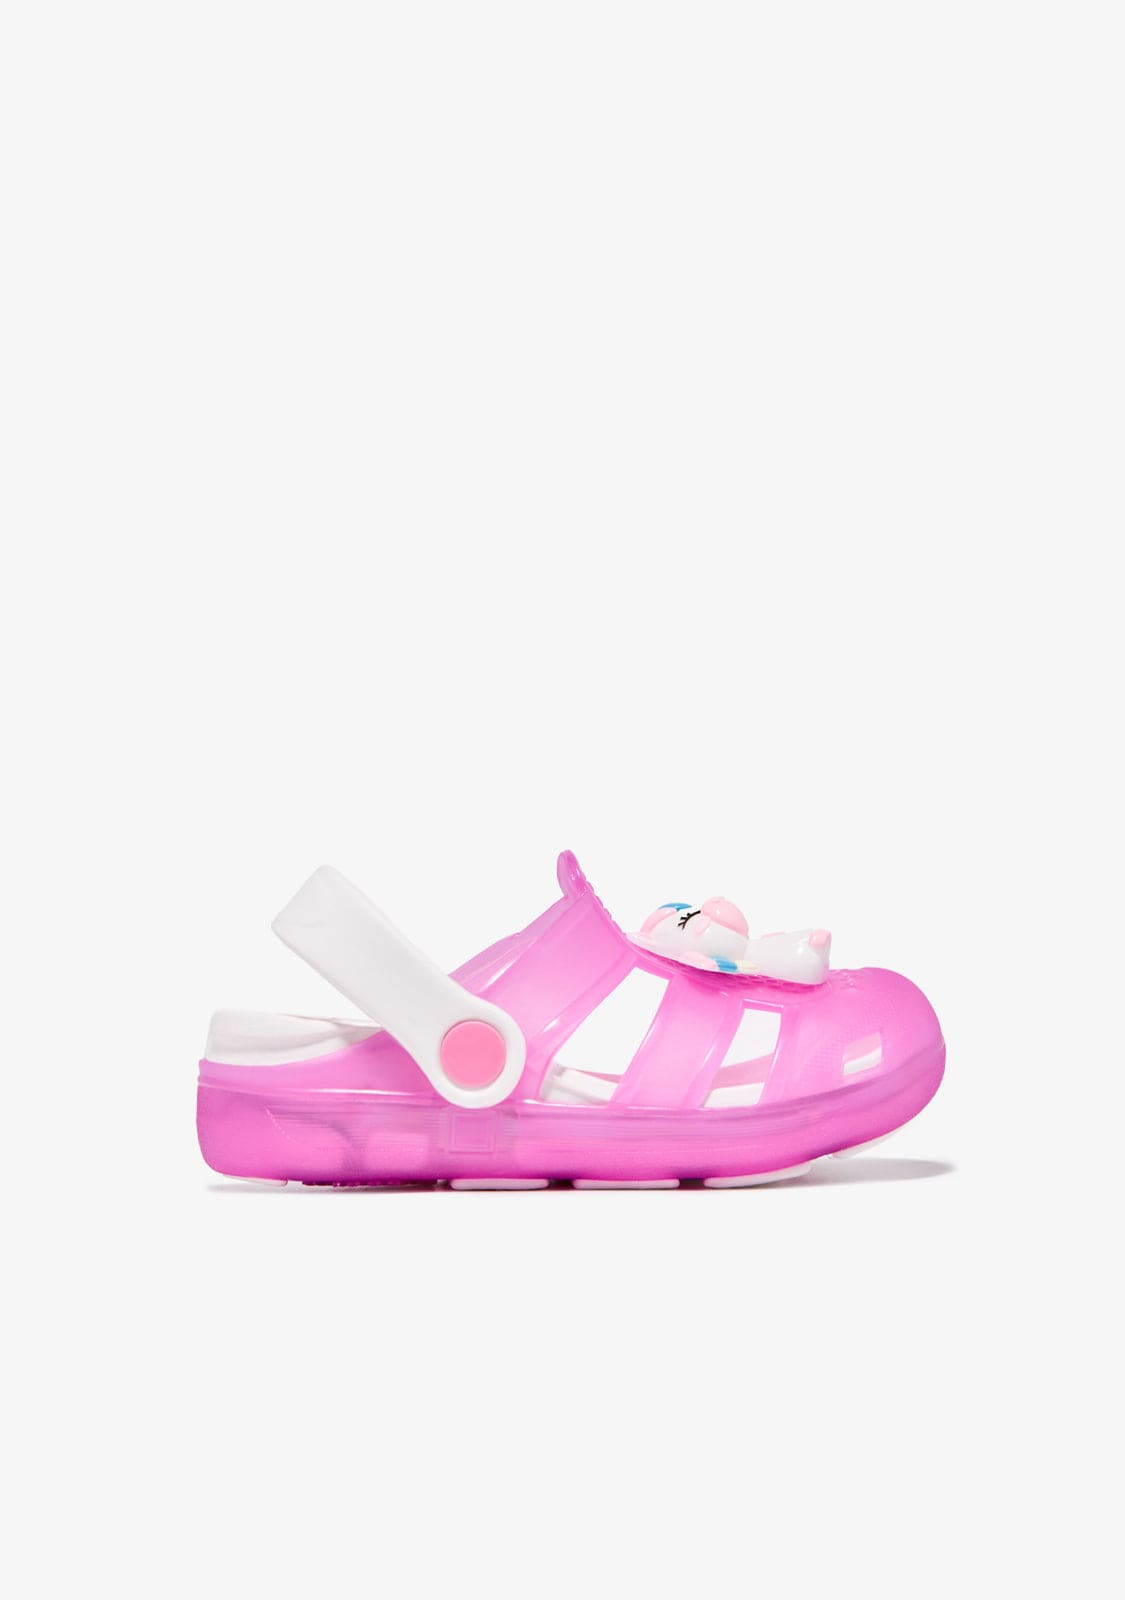 CONGUITOS ZUECO Pink Unicorn With Lights Clogs